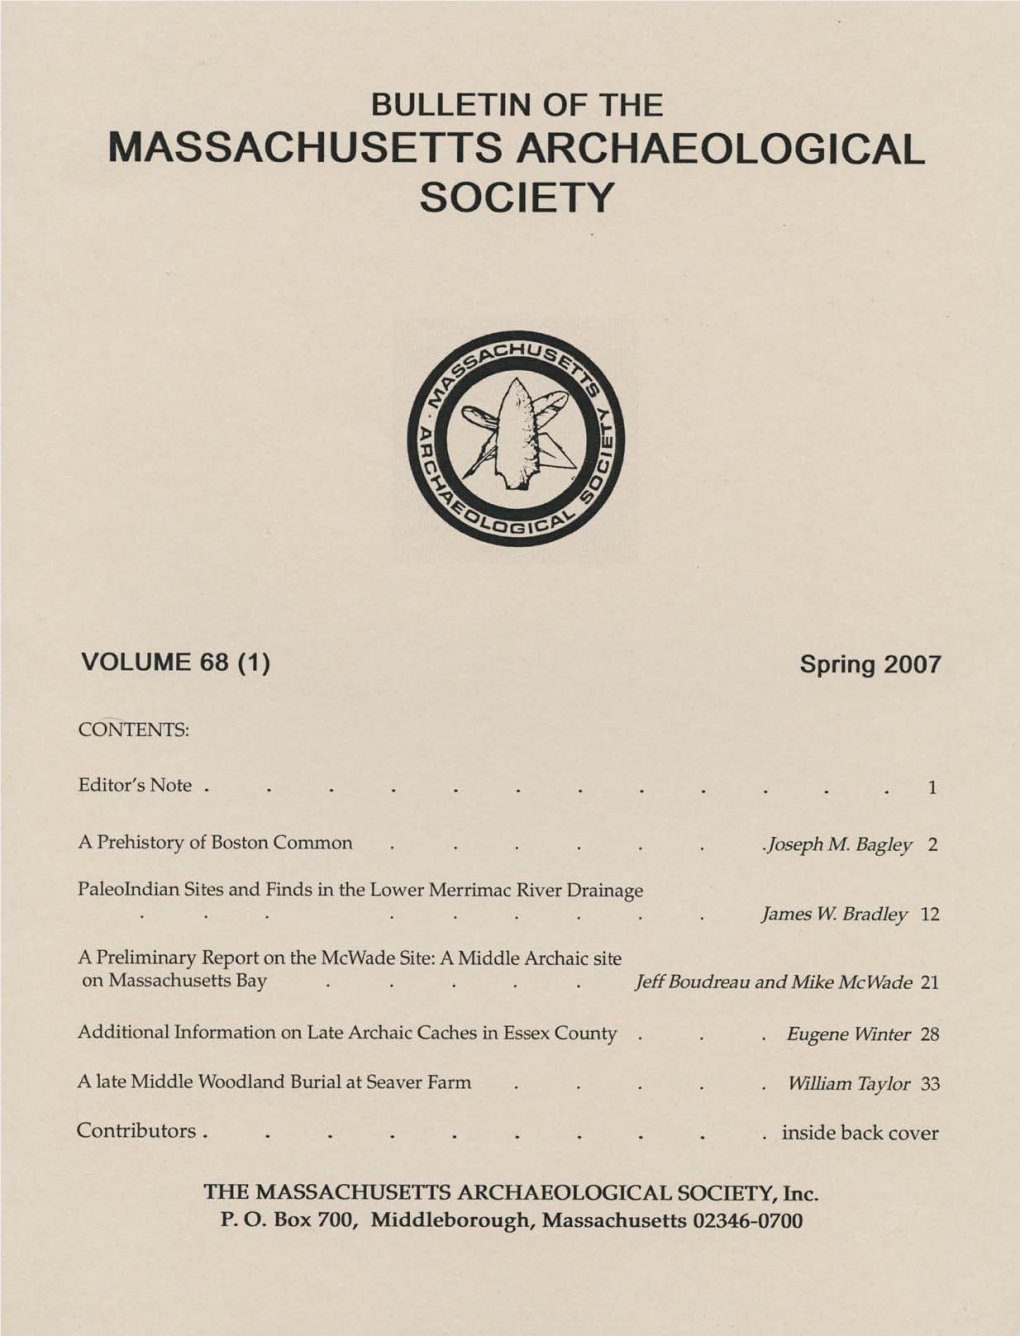 Bulletin of the Massachusetts Archaeological Society, Vol. 68, No. 1. Spring 2007